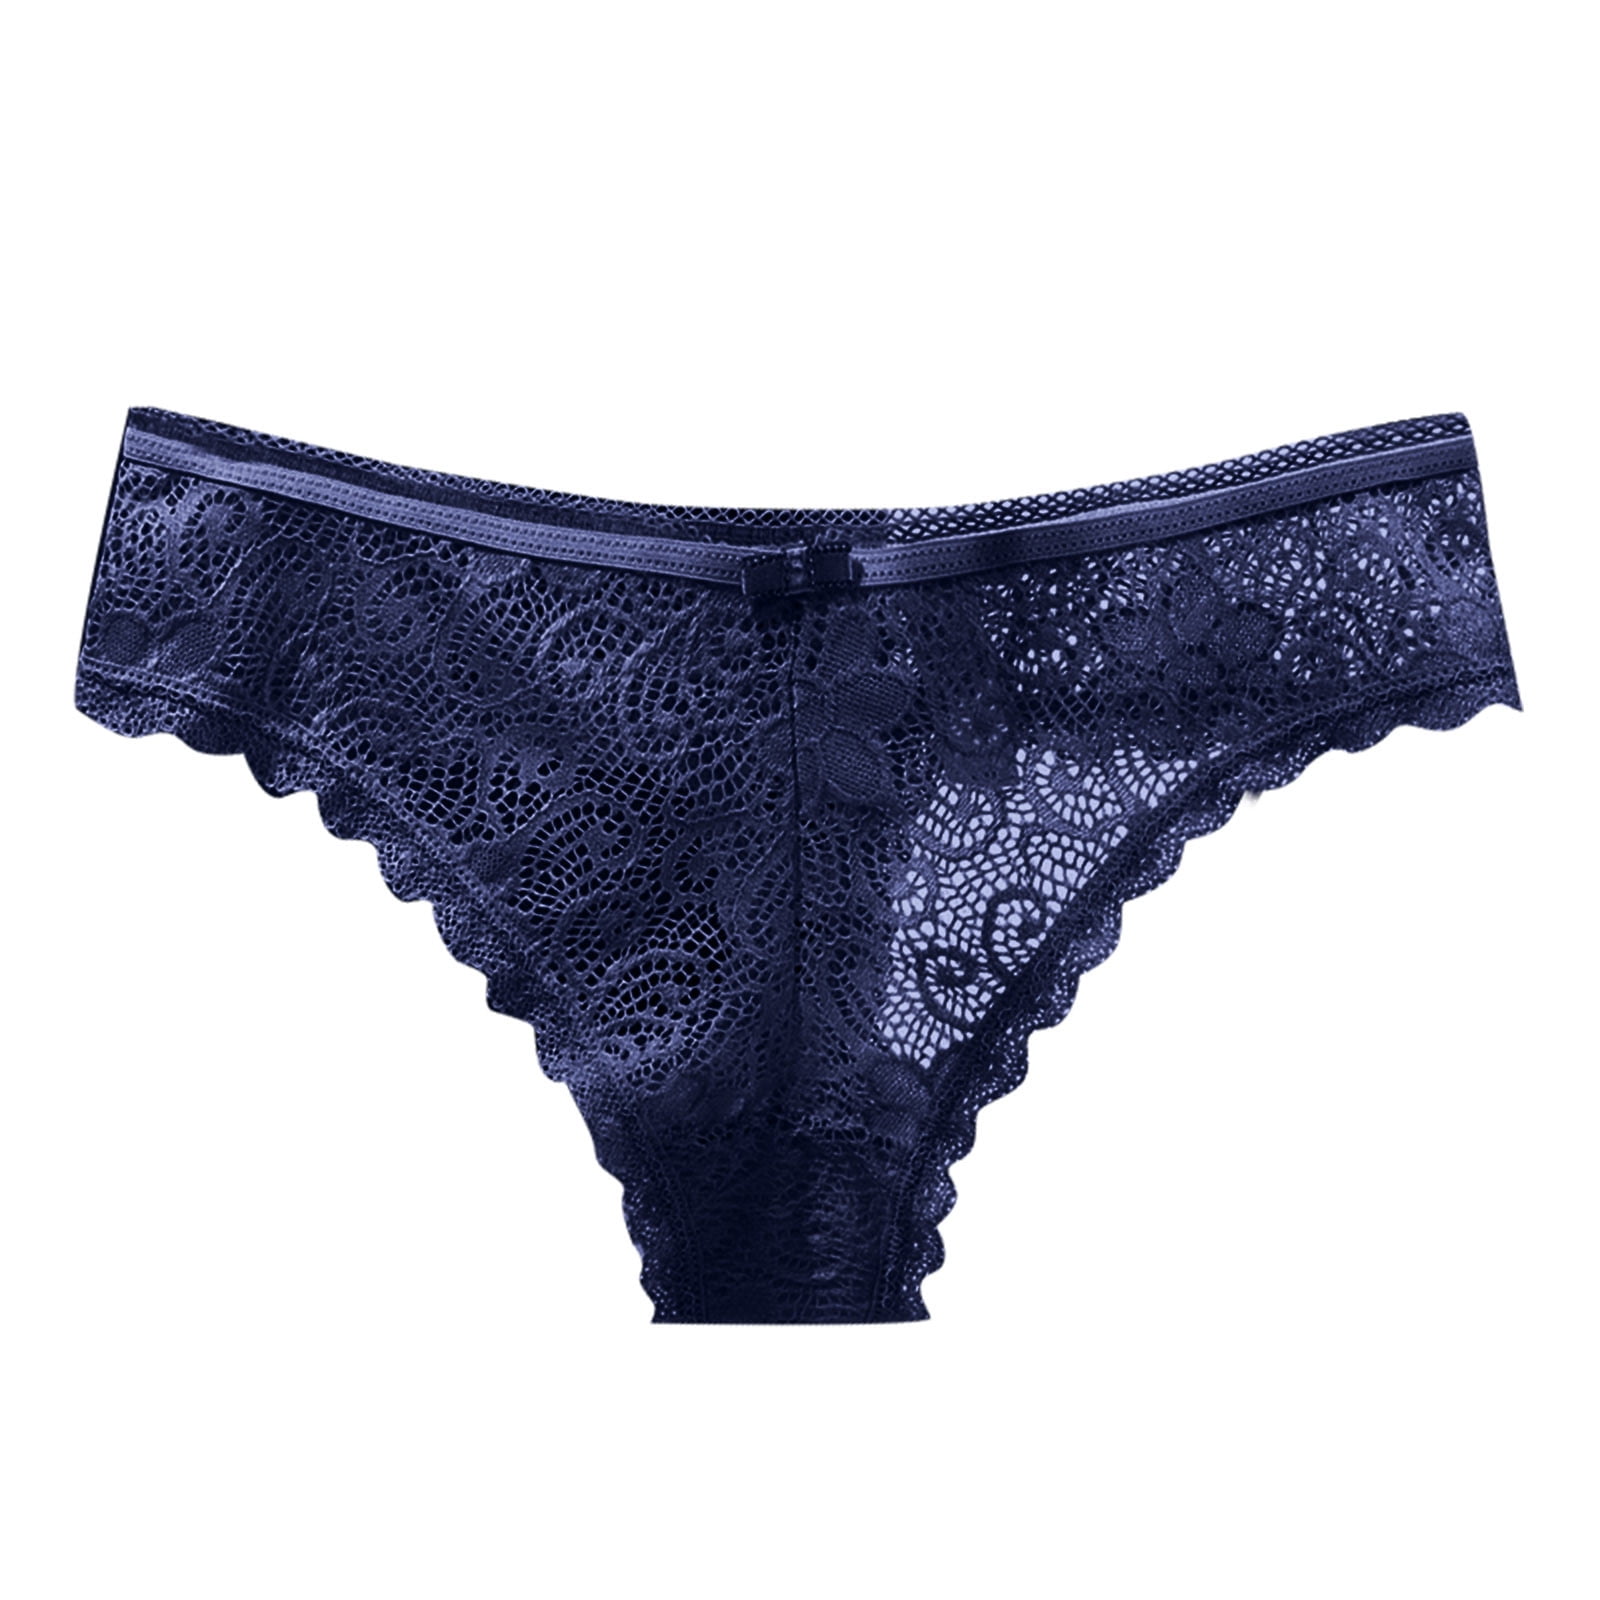 JDEFEG Lace Thong Panties Ladies Double Strap Breathable Four